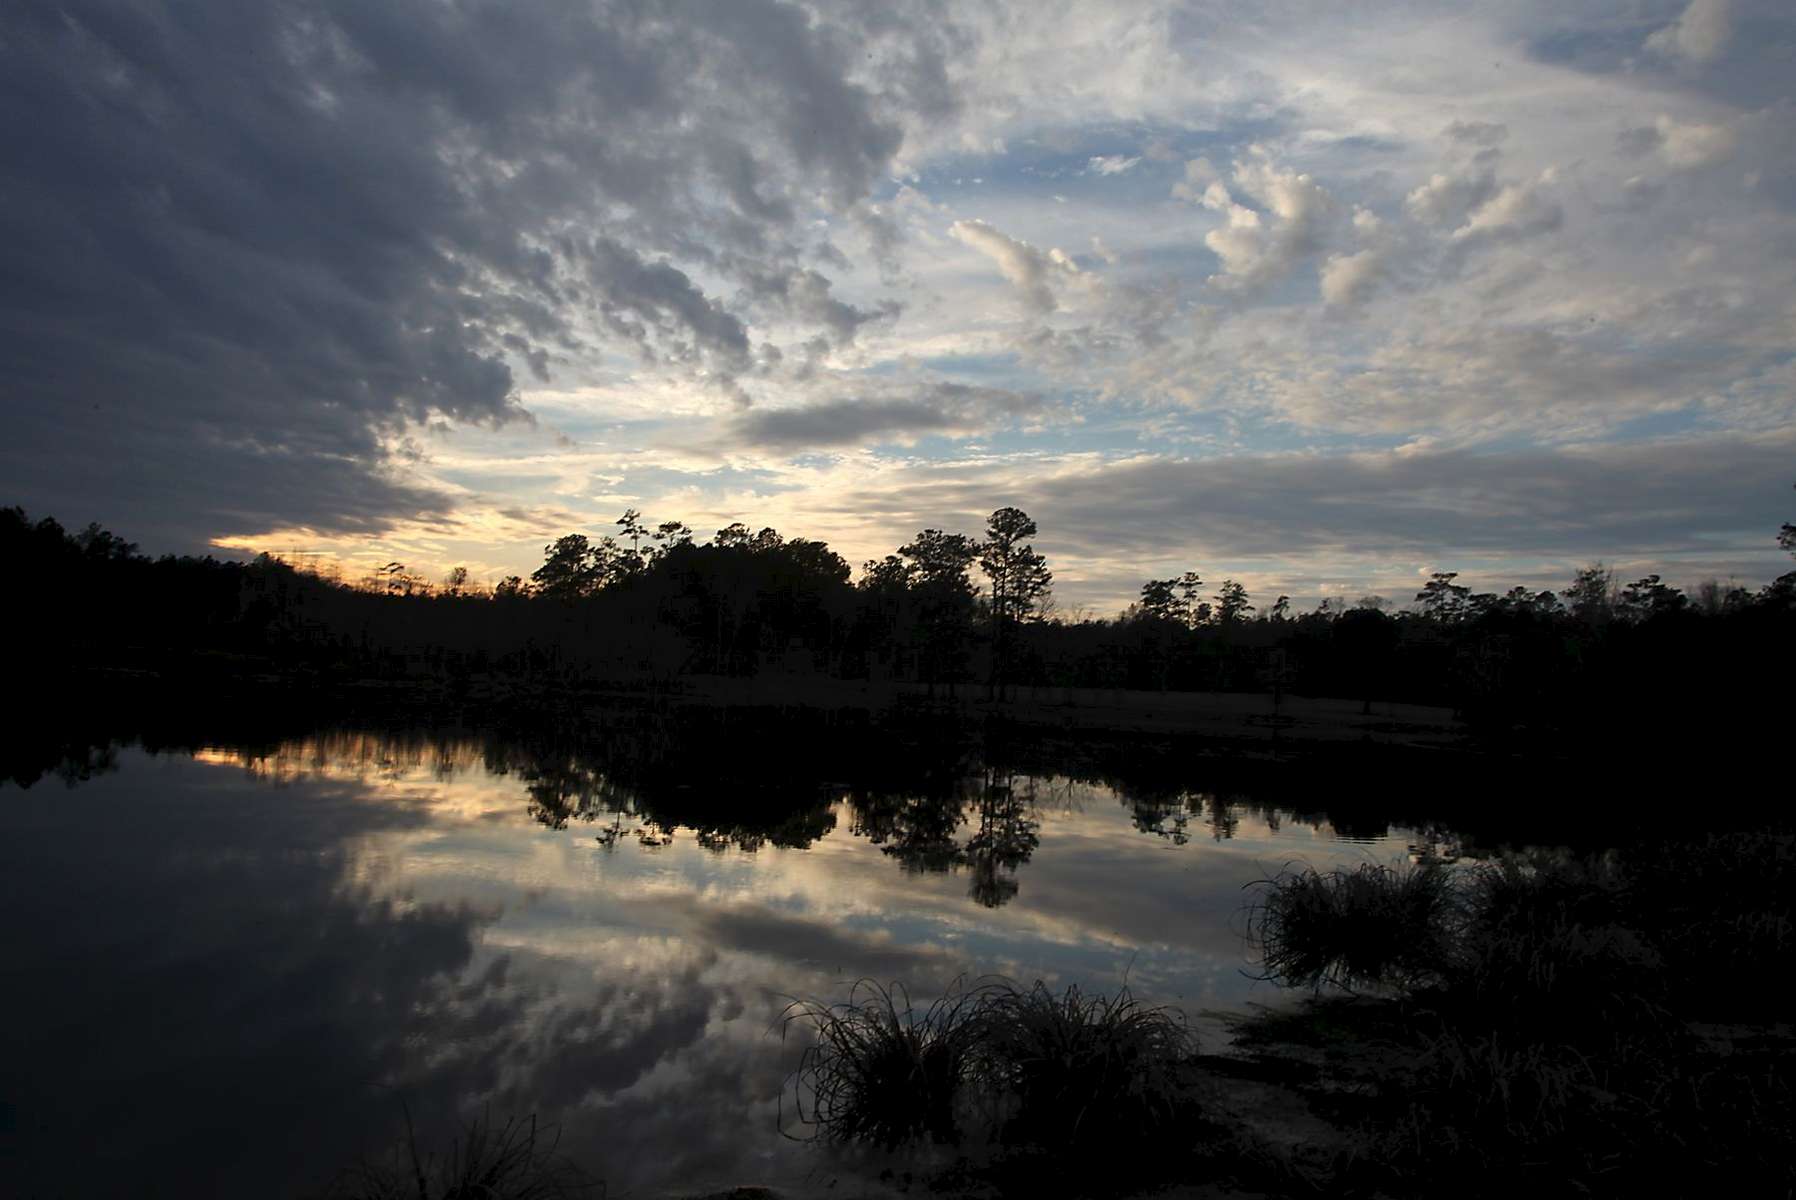 The late afternoon sunset reflects over a retention pond February 17, 2012, on the property at Medway Plantation in Goose Creek, S.C. The plantation contains 6728 acres of land and is staffed by 7 full-time employees. Upkeep on the property can run as high as $500,000 a year. In the South Carolina Lowcountry, more than a half-dozen antebellum plantations, which don't change hands often, are for sale.REUTERS/Randall Hill